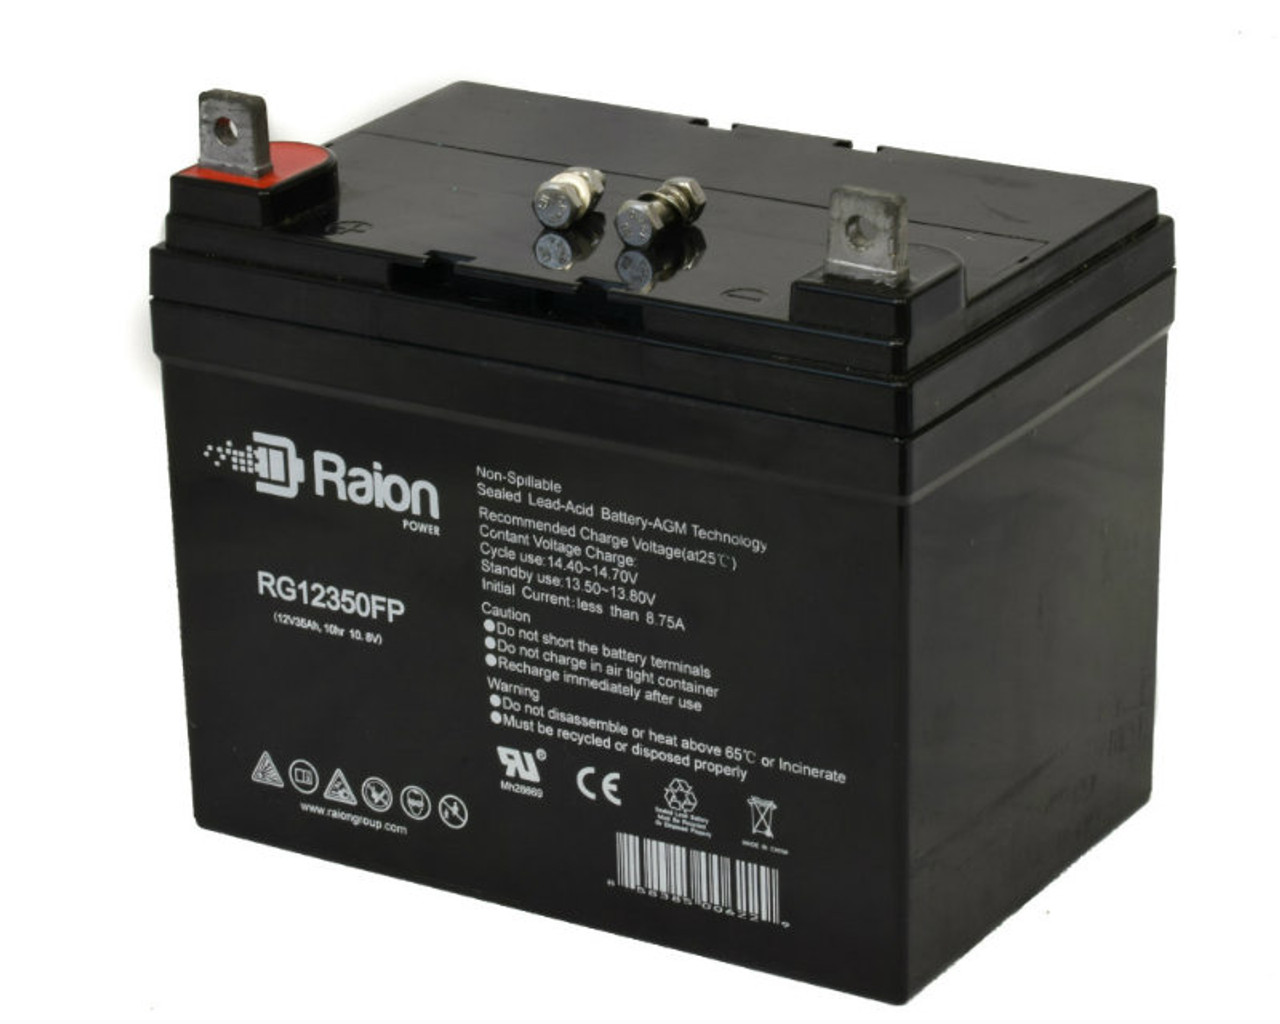 Raion Power Replacement 12V 35Ah Battery for Case International 226 - 1 Pack